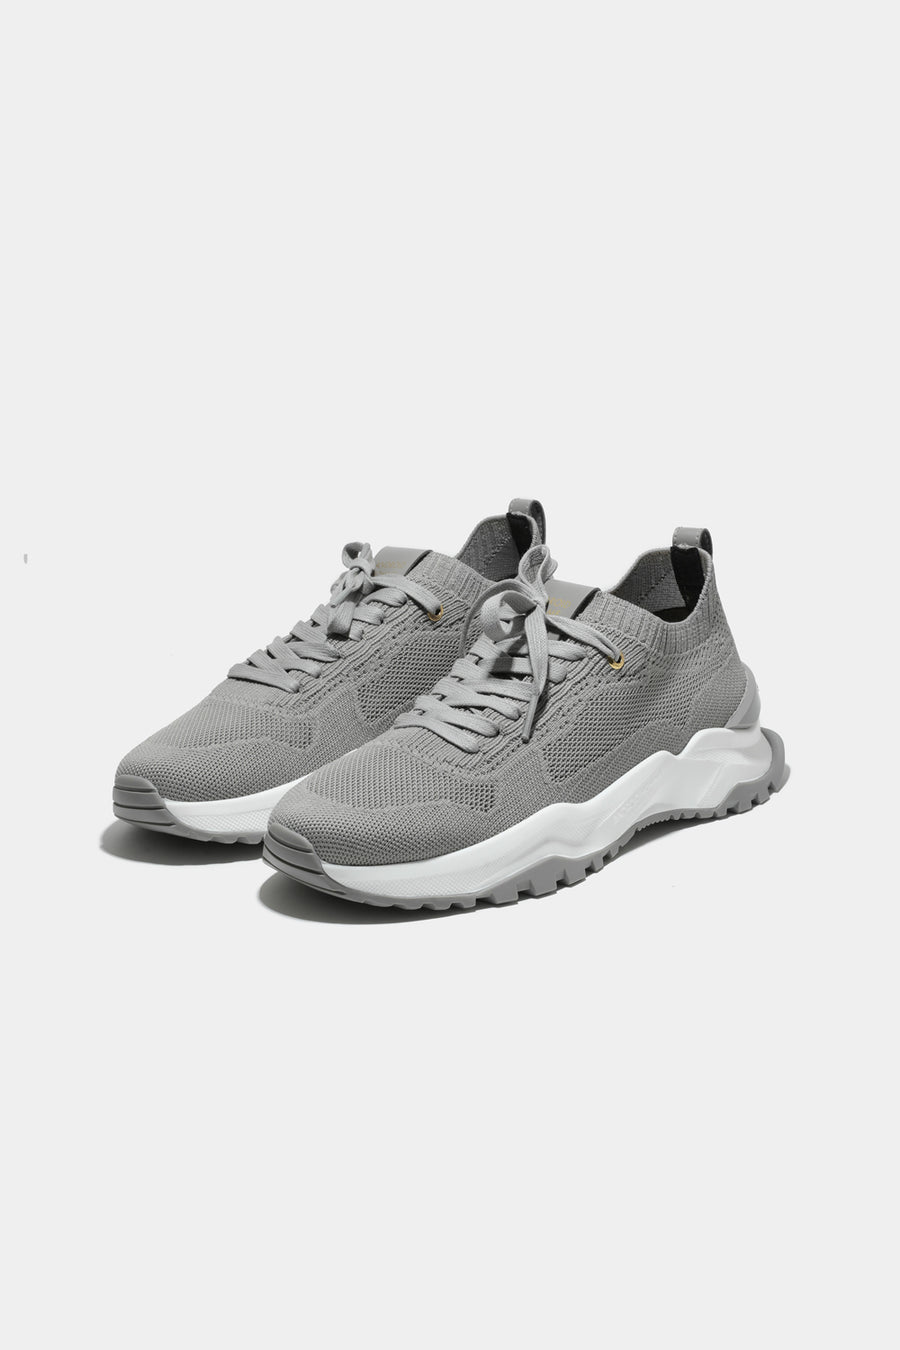 Buy the Android Homme Leo Carrillo Grey Knit Sneaker at Intro. Spend £50 for free UK delivery. Official stockists. We ship worldwide.